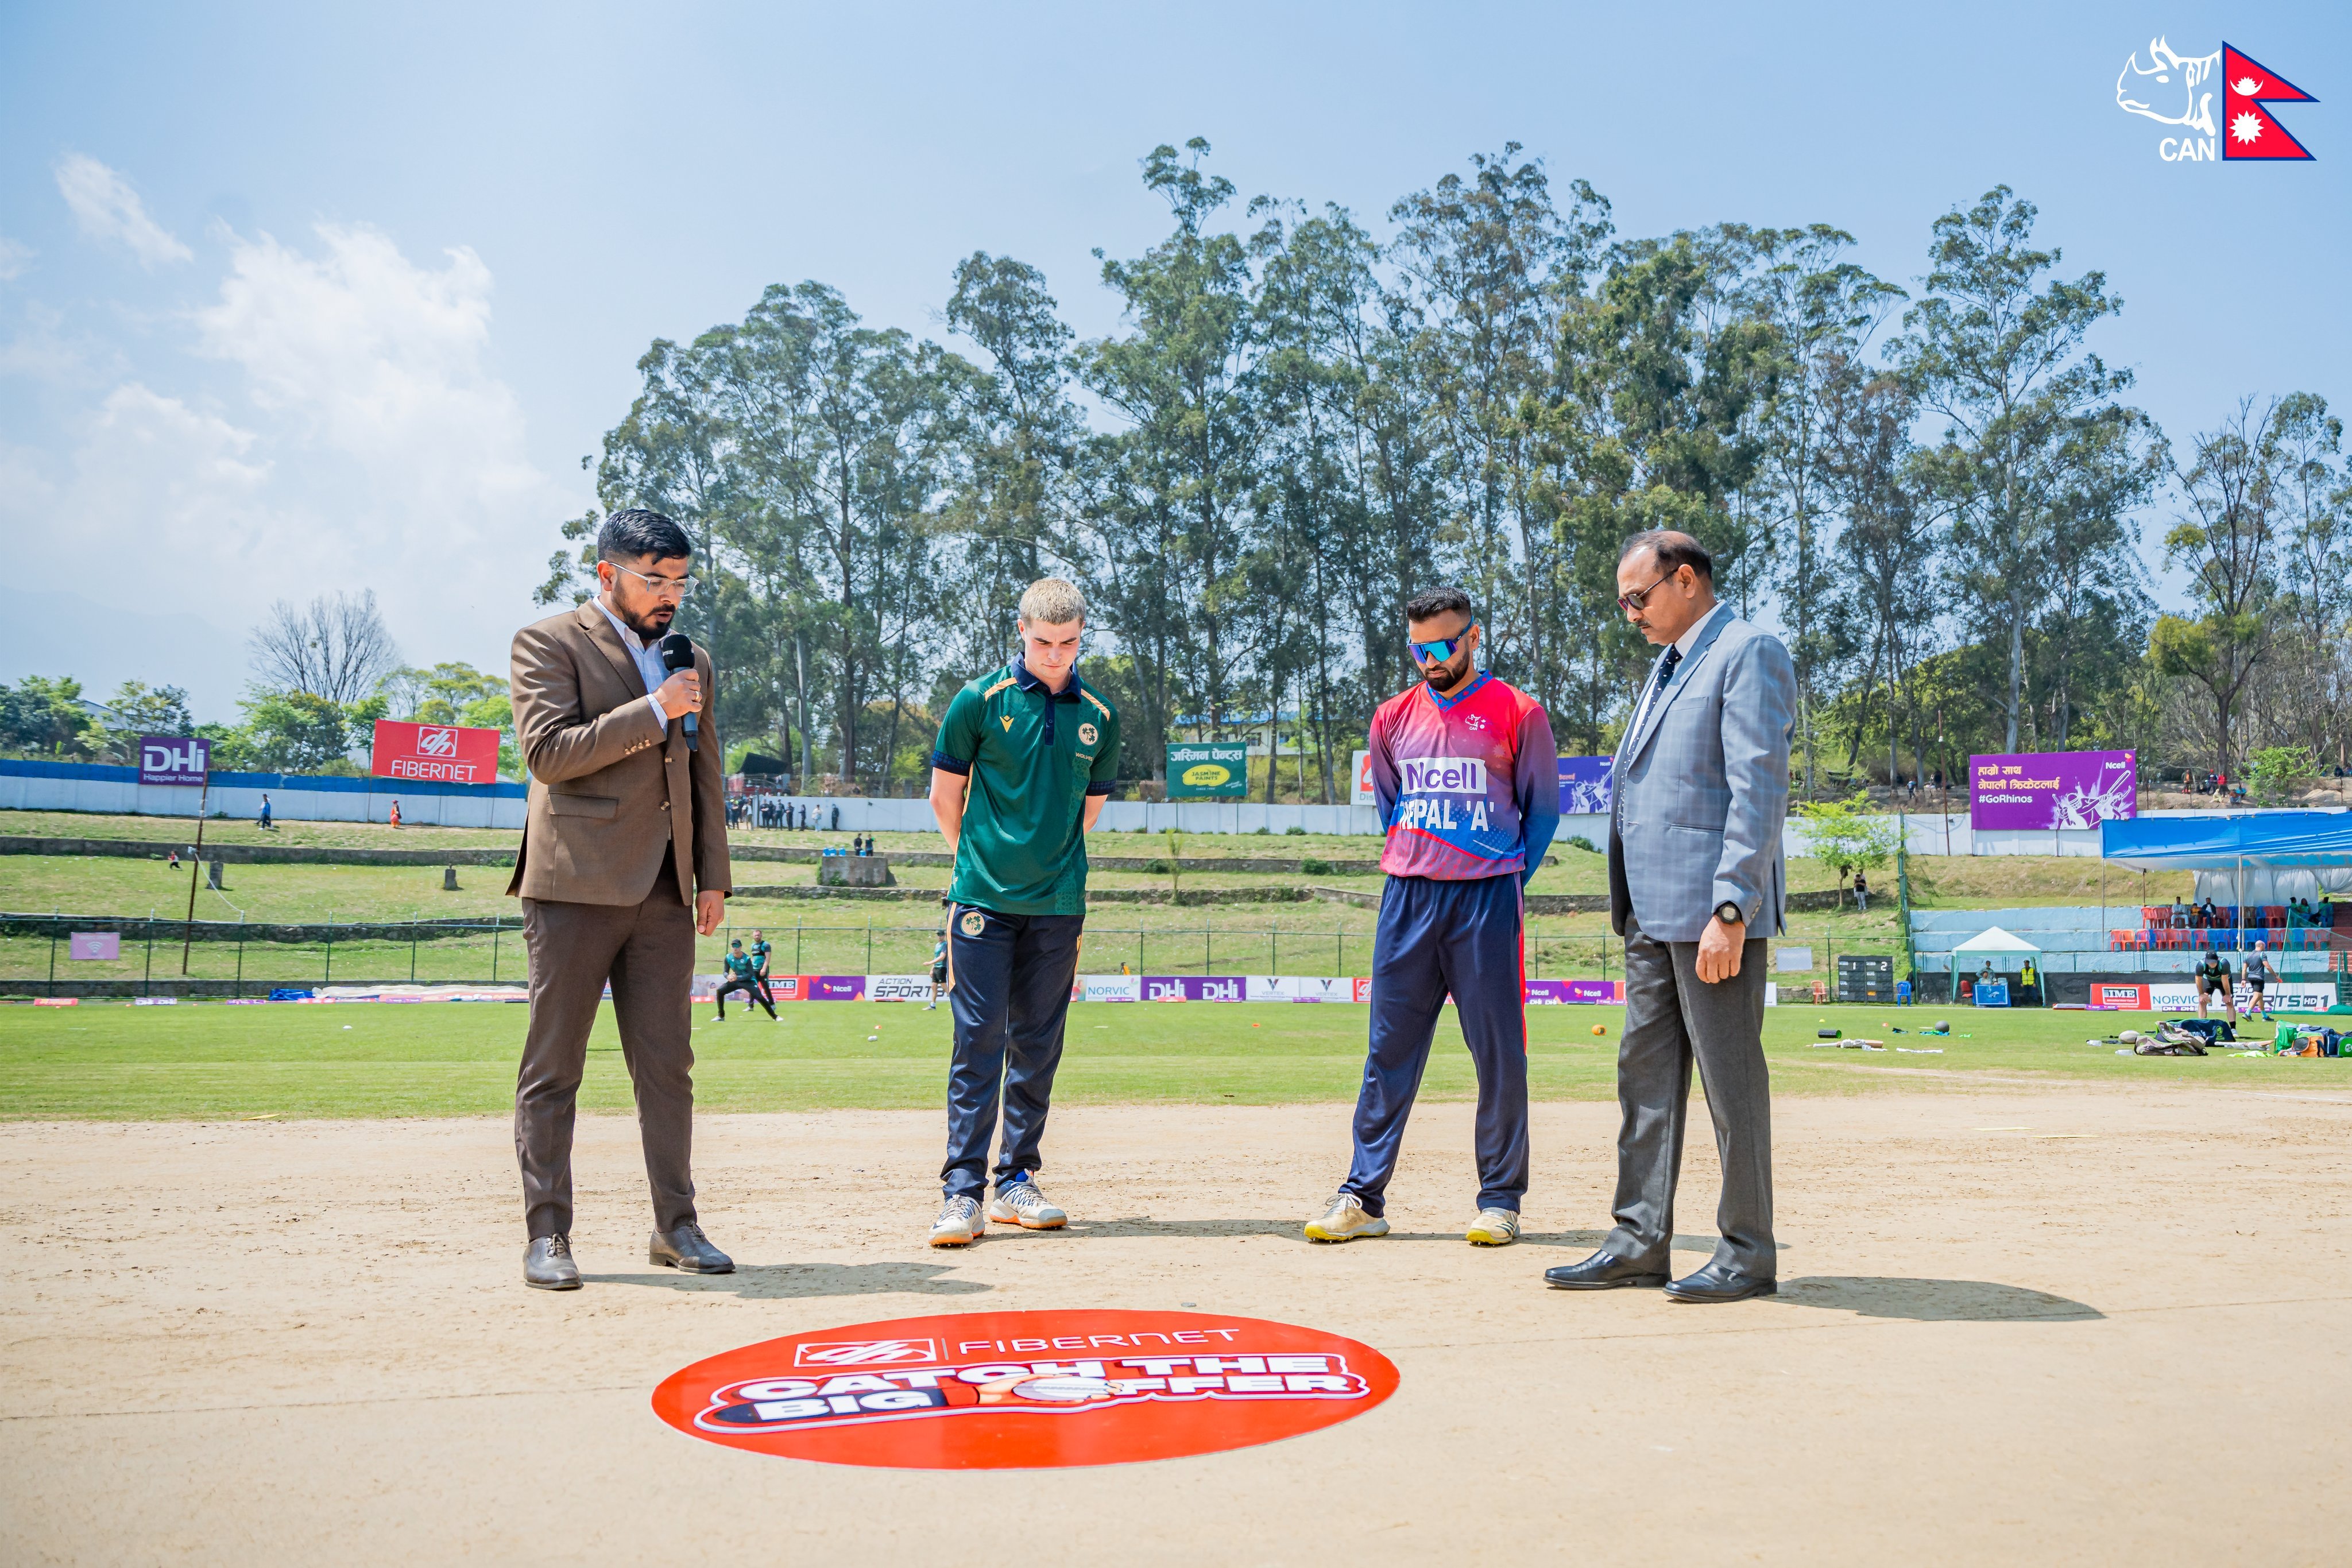 Nepal 'A' opts to field first against Ireland Wolves